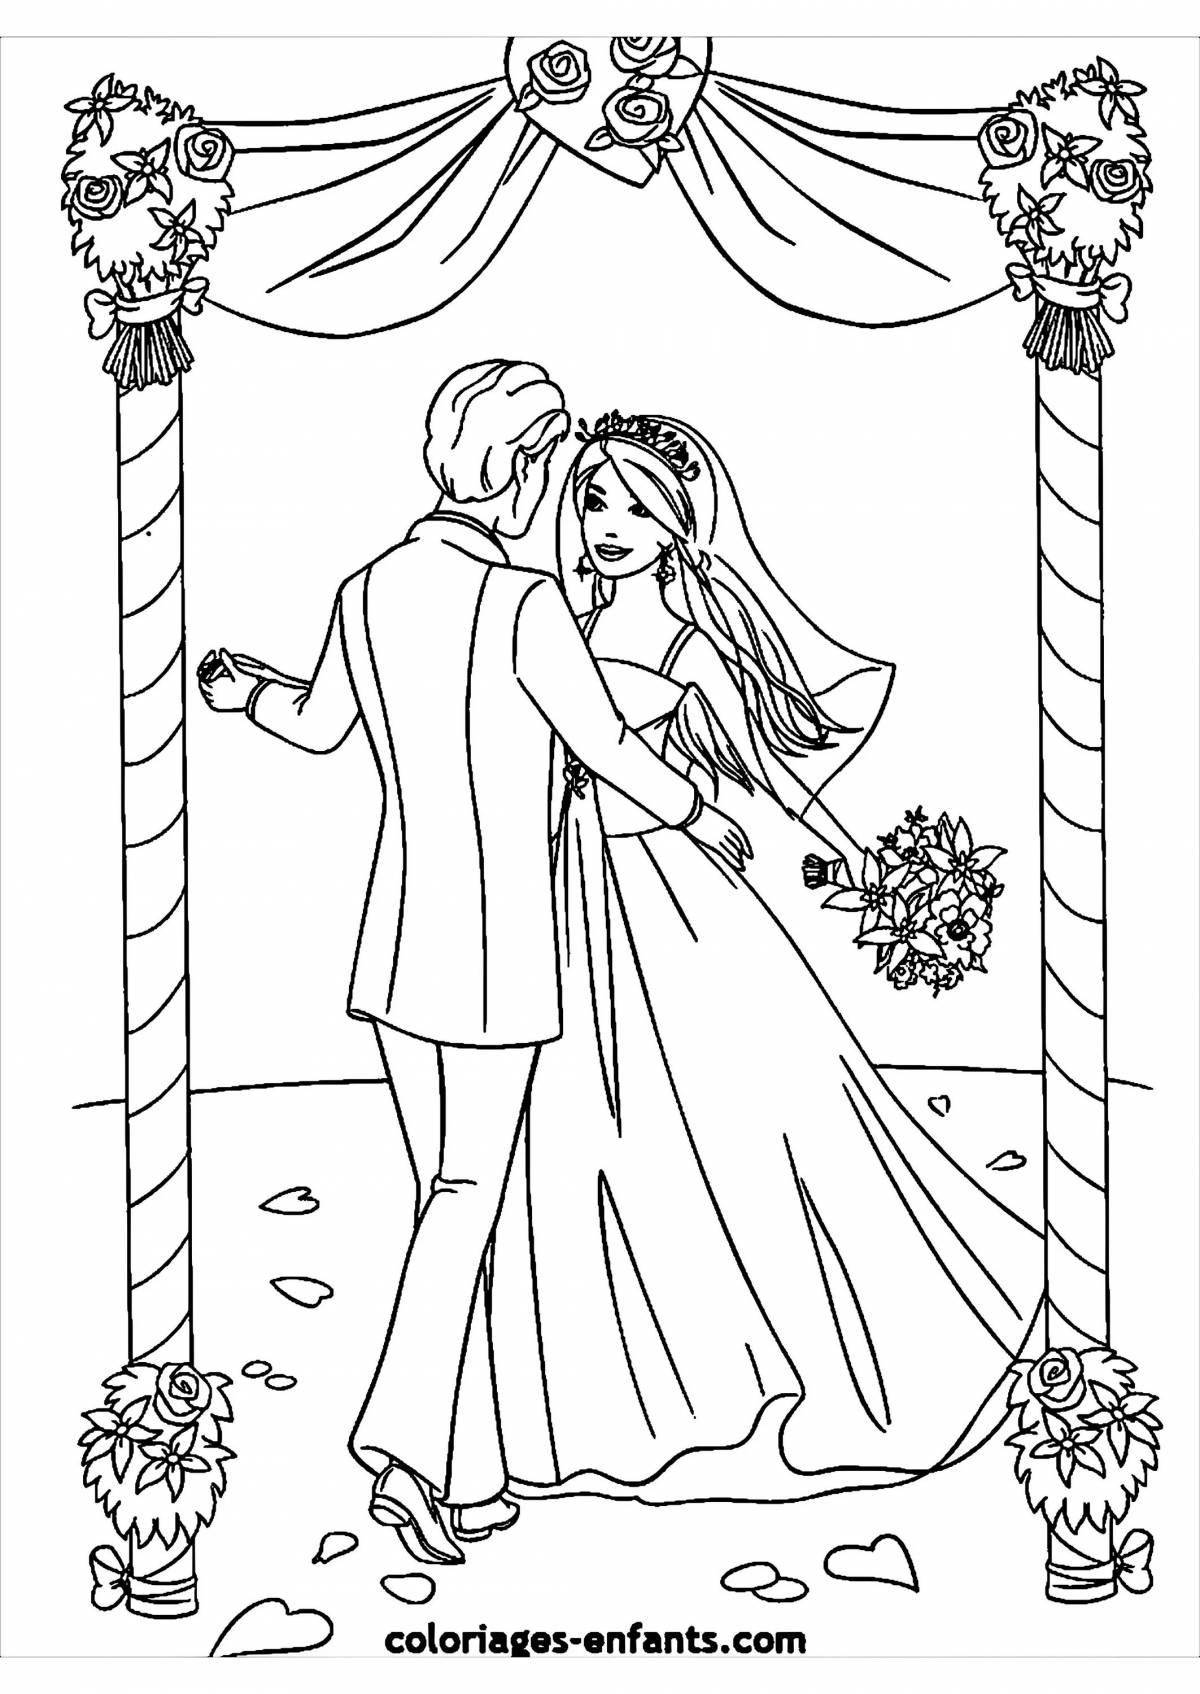 Coloring page wild bride and groom